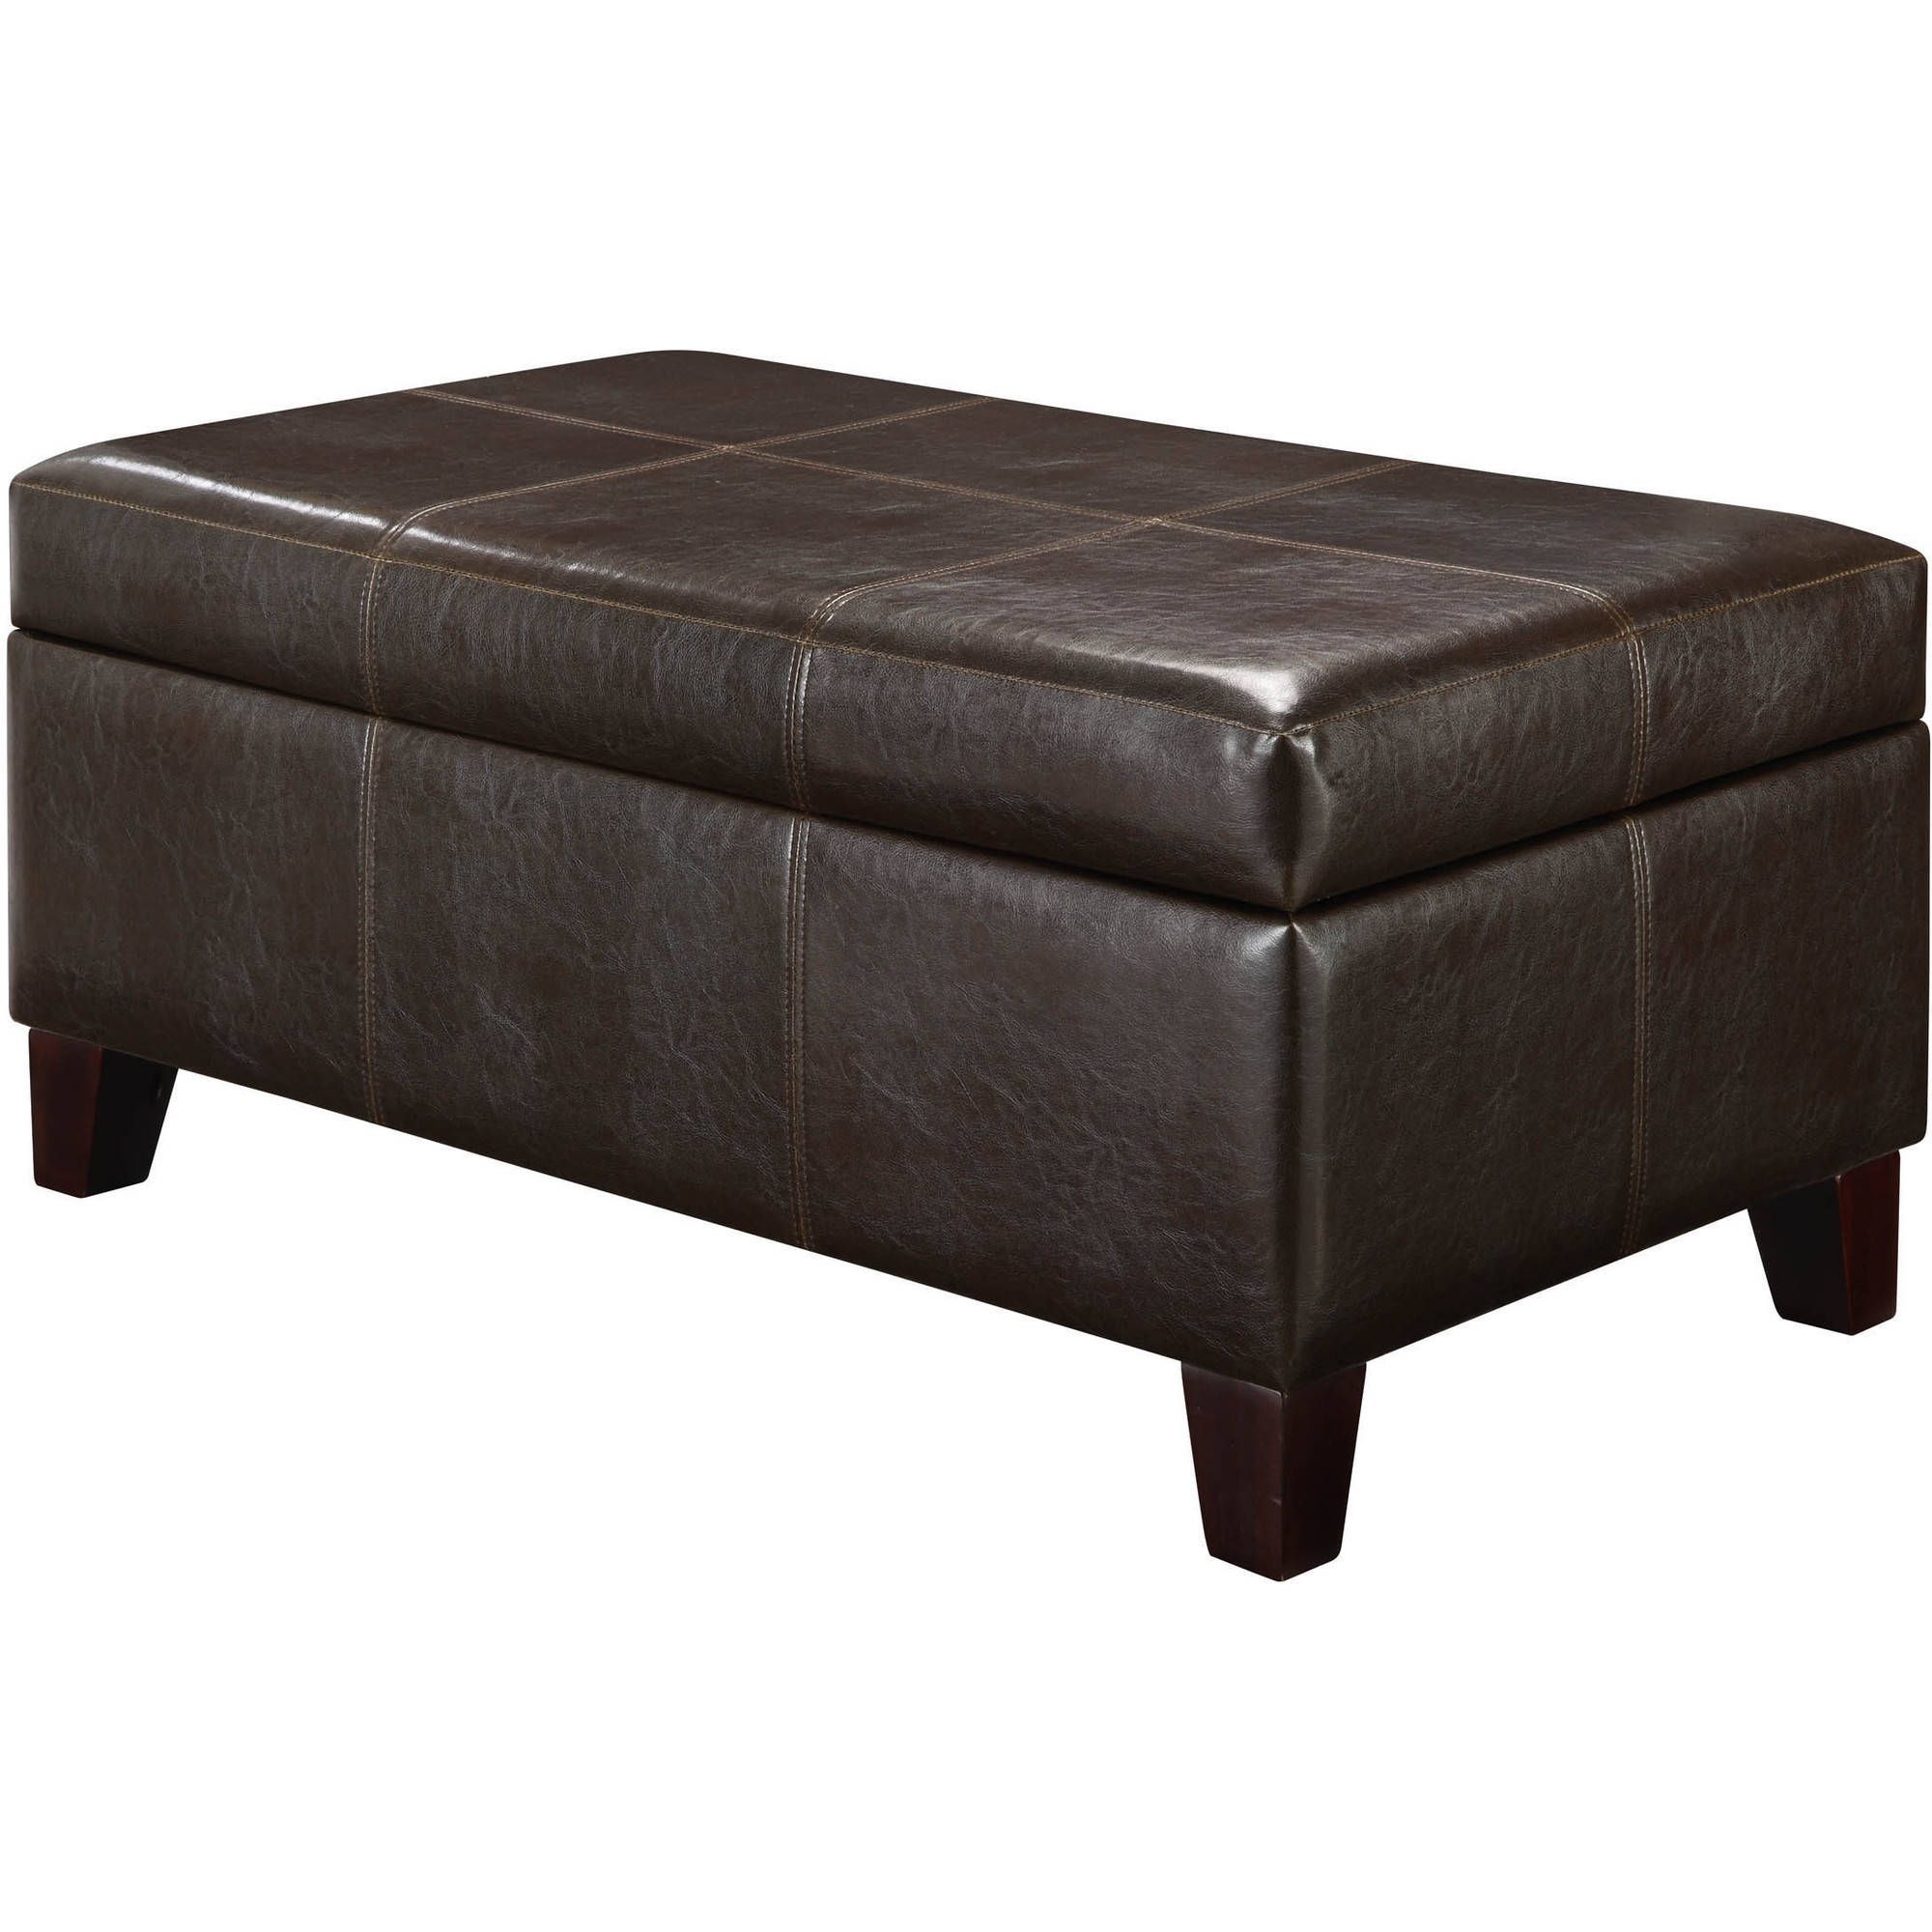 Navy And Dark Brown Jute Pouf Ottomans For Trendy Small Leather Look Vinyl Ottoman – Walmart (View 3 of 10)